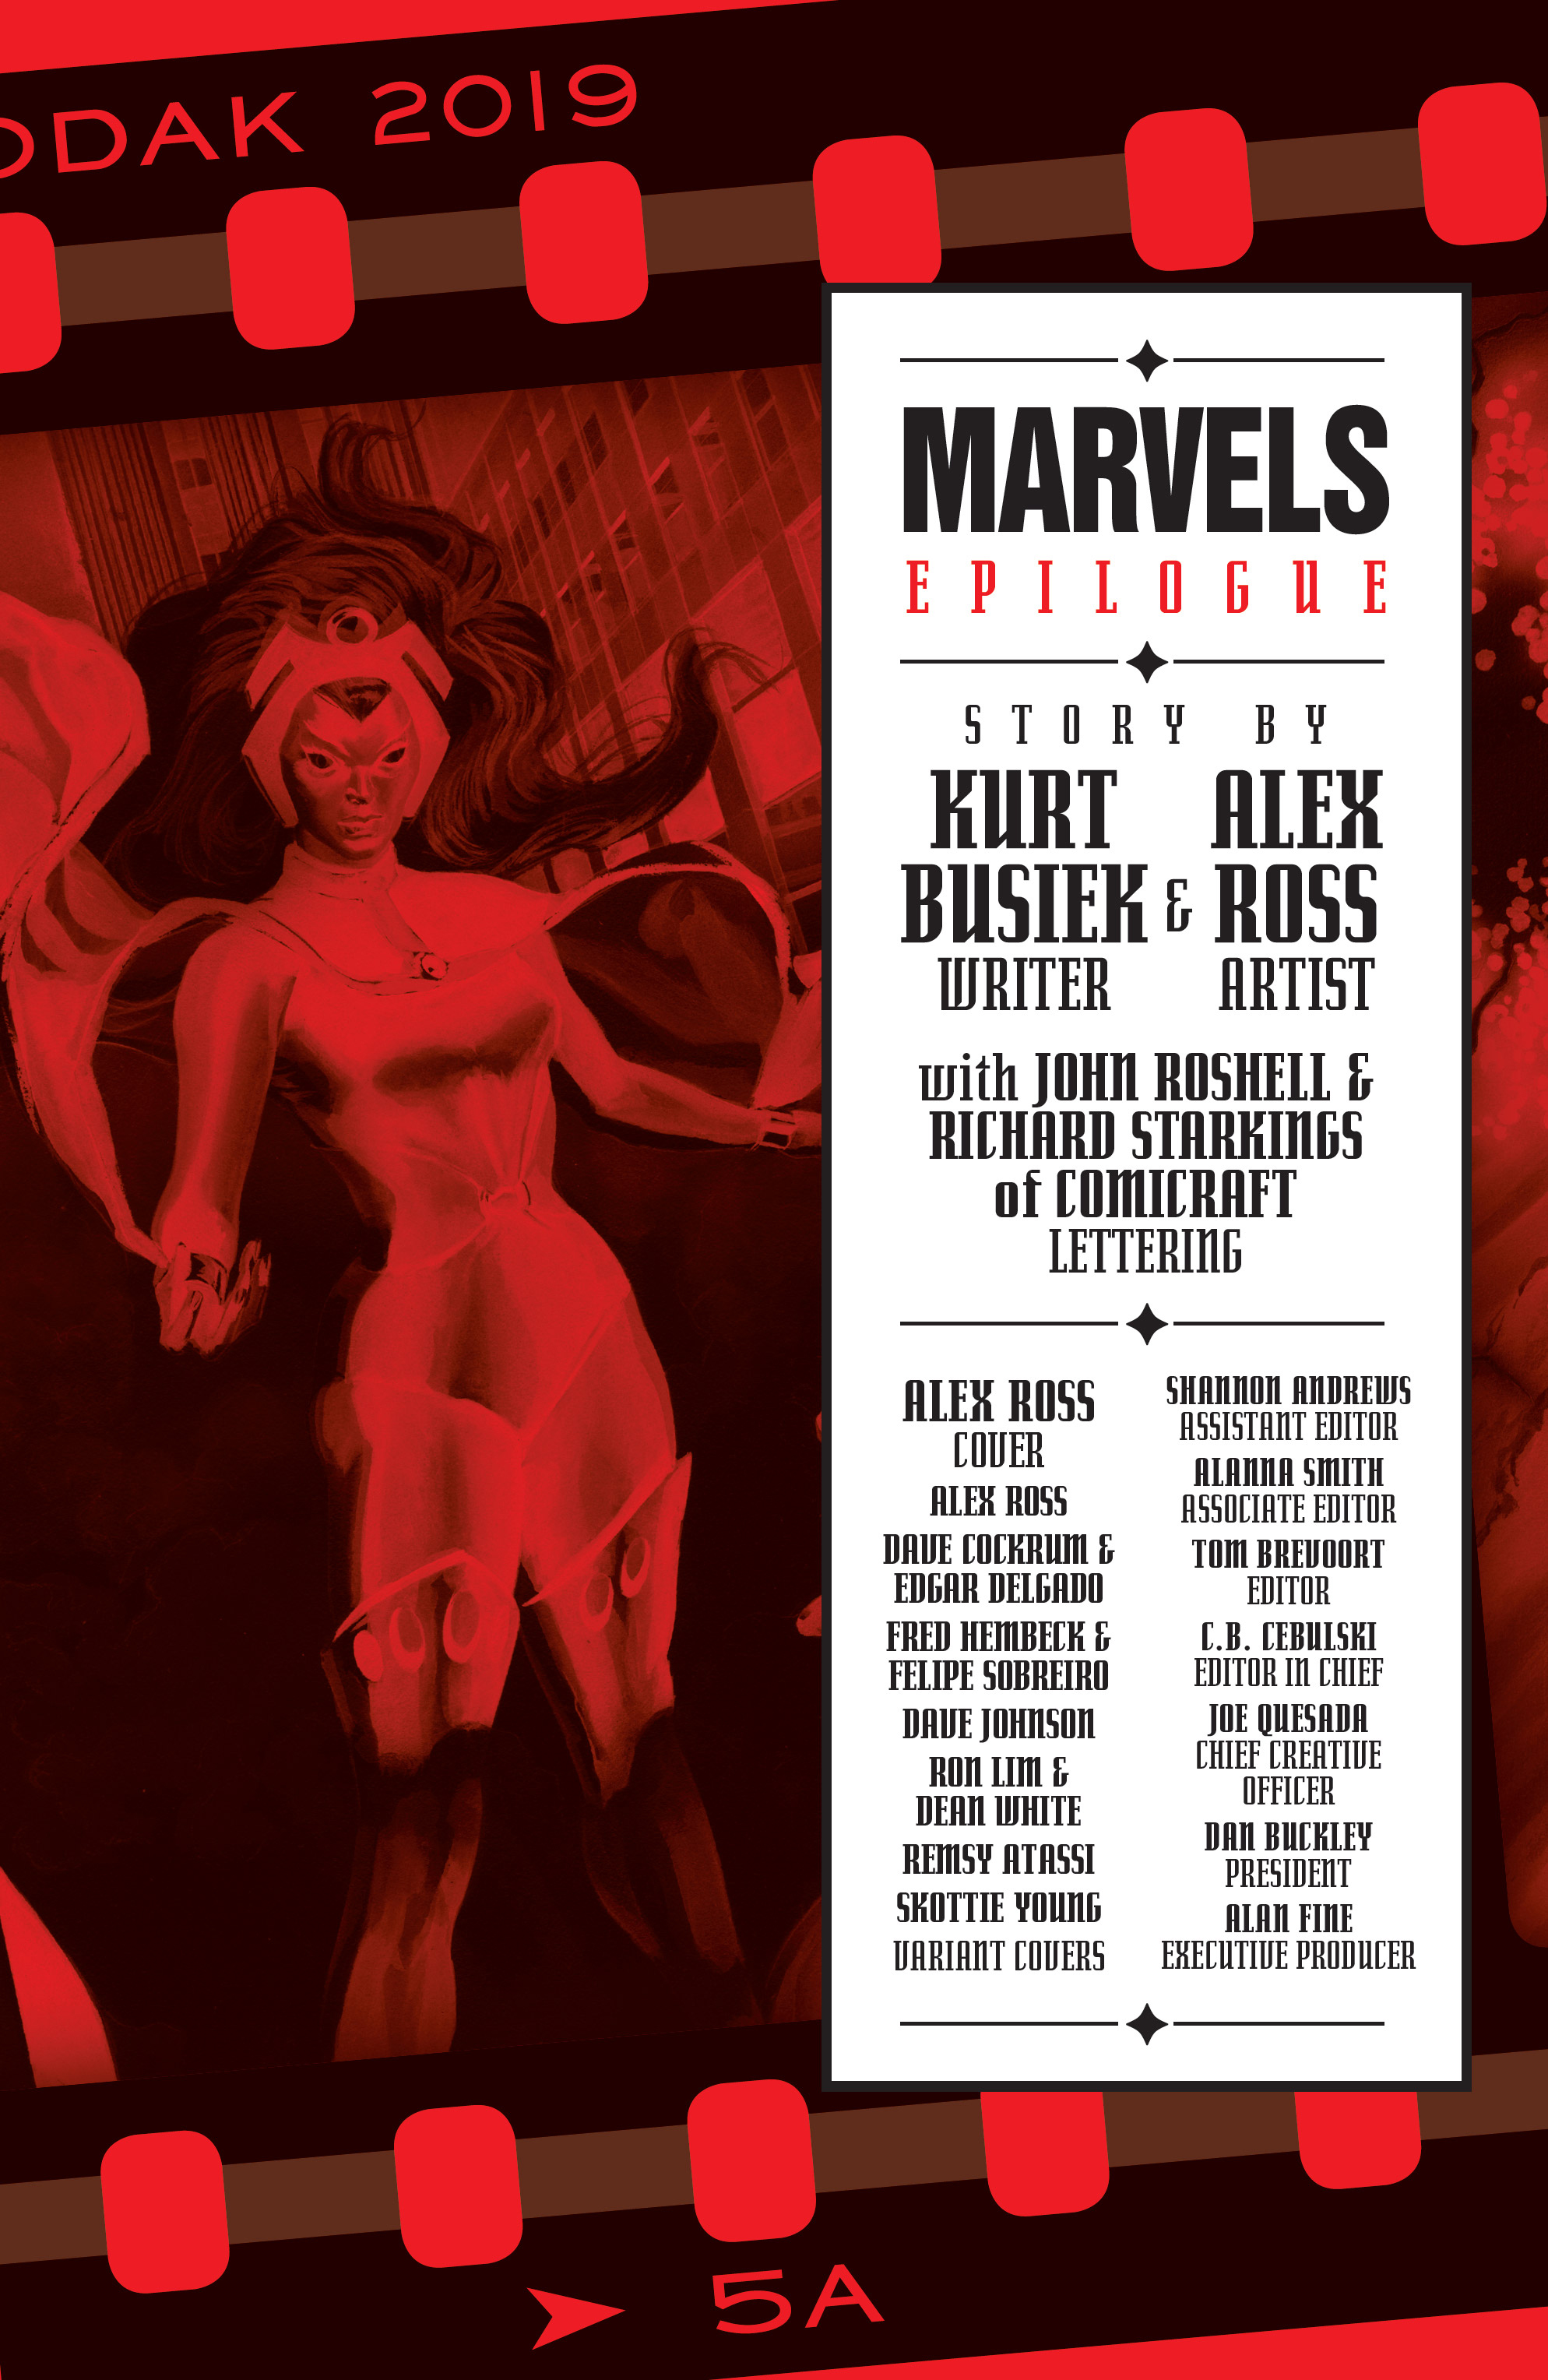 Read online Marvels Epilogue comic -  Issue # Full - 16